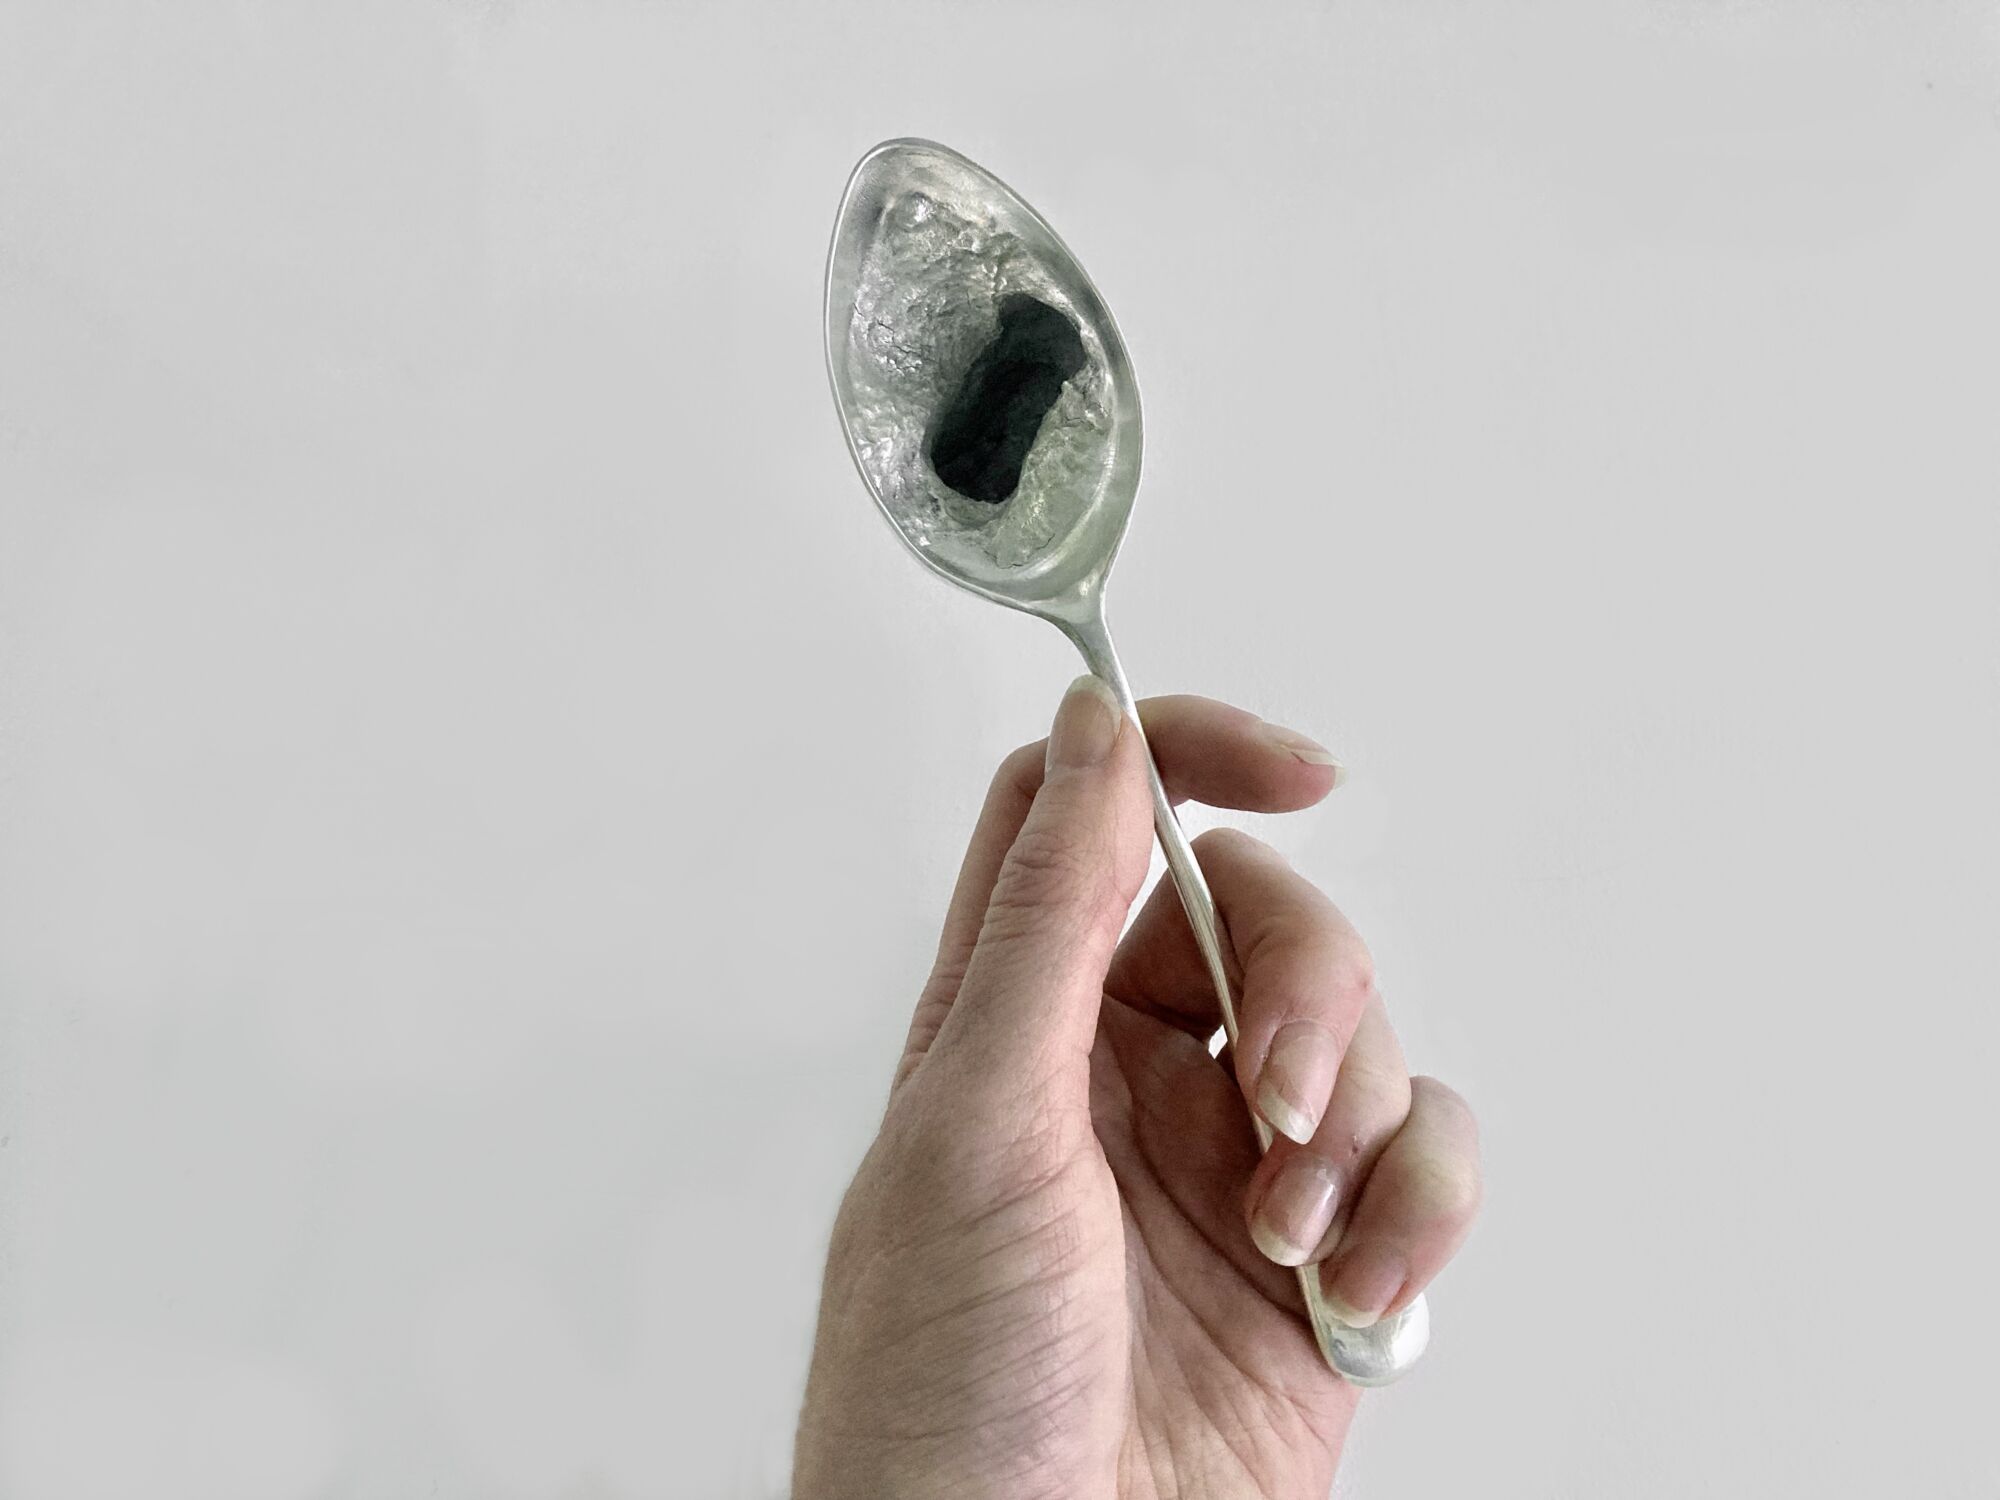 The Wick - holding spoon, Courtesy of the Artist